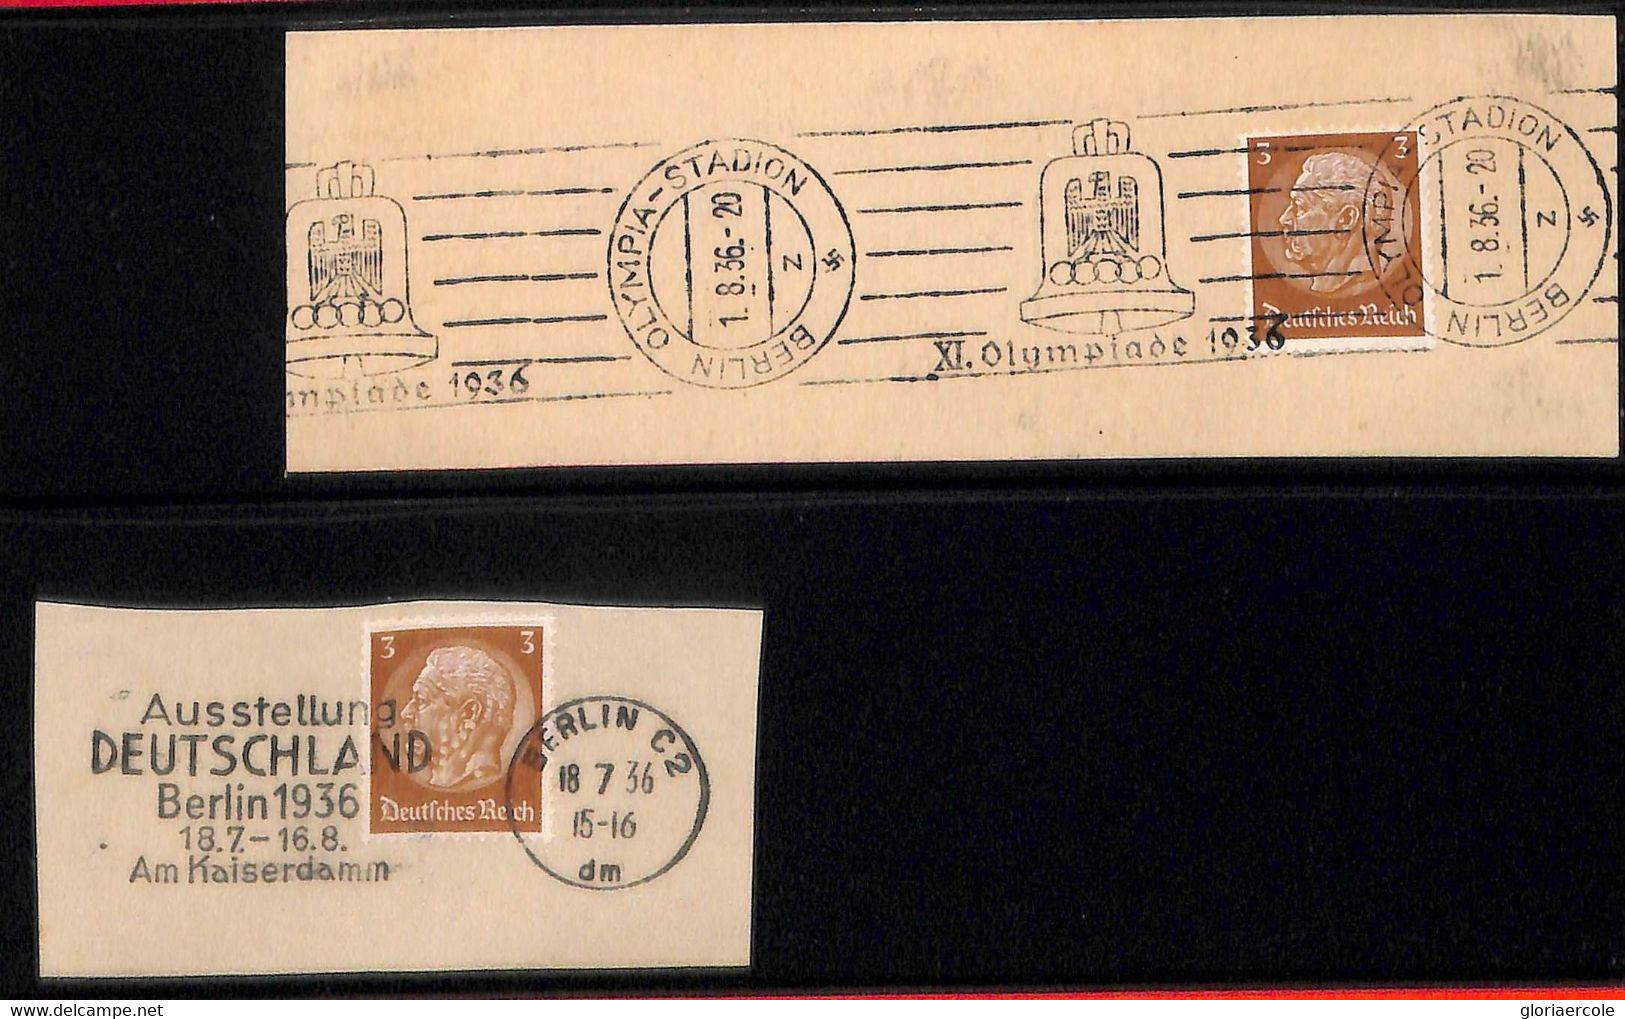 Aa2558 - GERMANY - POSTAL HISTORY -  Olympic Games LOT Of 5  POSTMARKS - Sommer 1936: Berlin